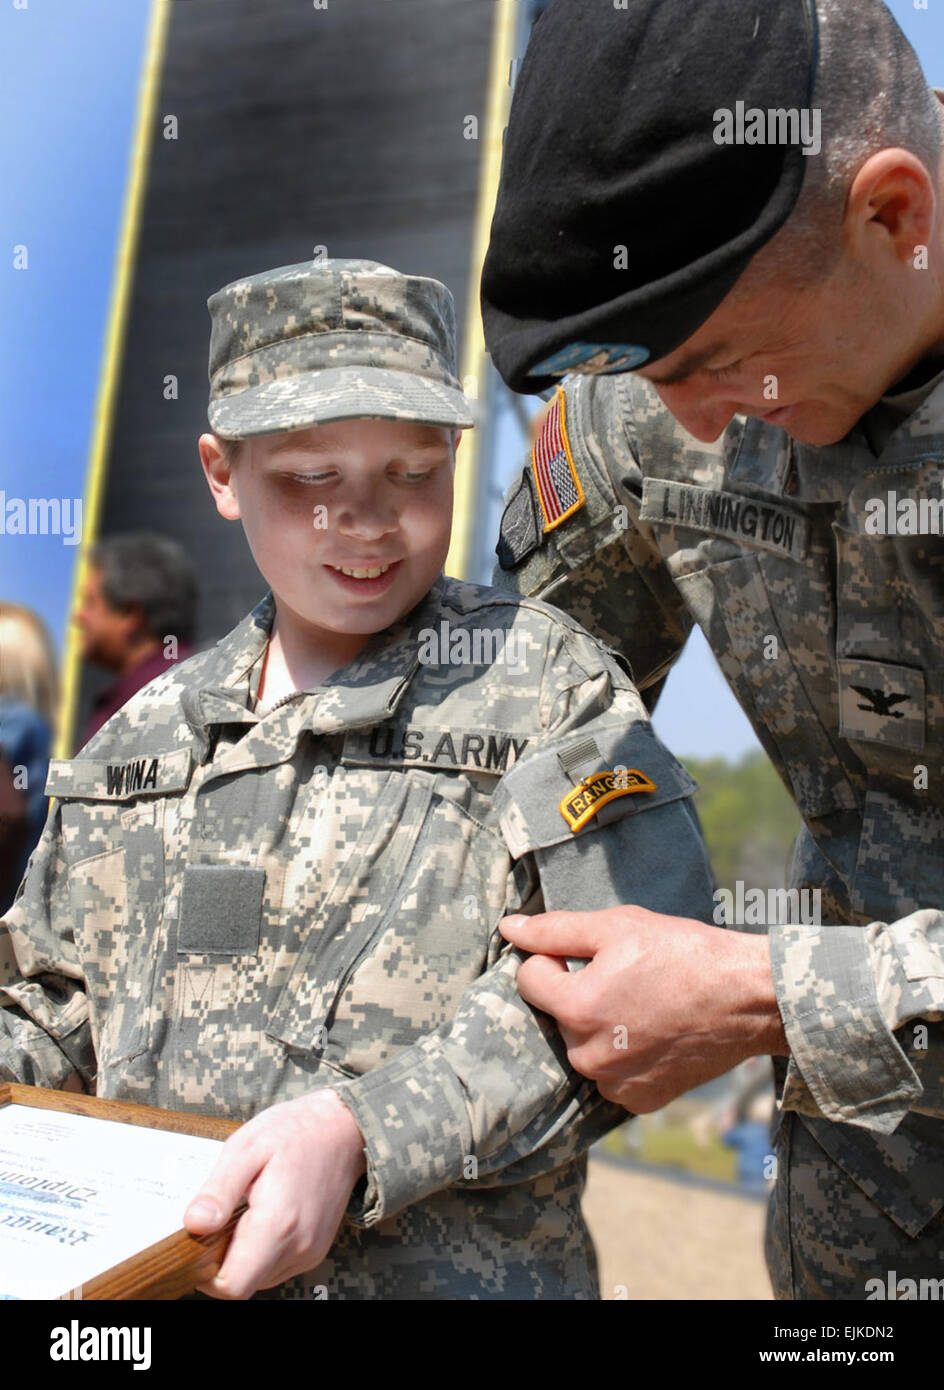 14-year old Riley Woina, of Plymouth, Conn., left became one of the Army’s newest Rangers during a graduation at Fort Benning today.  Col. Michael Linnington, United States Army Infantry School's Assistant Commandant pinned him with a coveted Ranger tab.  Woina, who has been diagnosed with cycstic fibrosis, stood in the ranks with other Ranger students at Fort Benning with the help of Fort Benning’s Ranger Training Brigade and the Make-A-Wish Foundation.  As part of his wish, Woina spent a week training with the Ranger students at Camp Rudder, during the &quot;swamp phase.”  Swamp phase is the Stock Photo